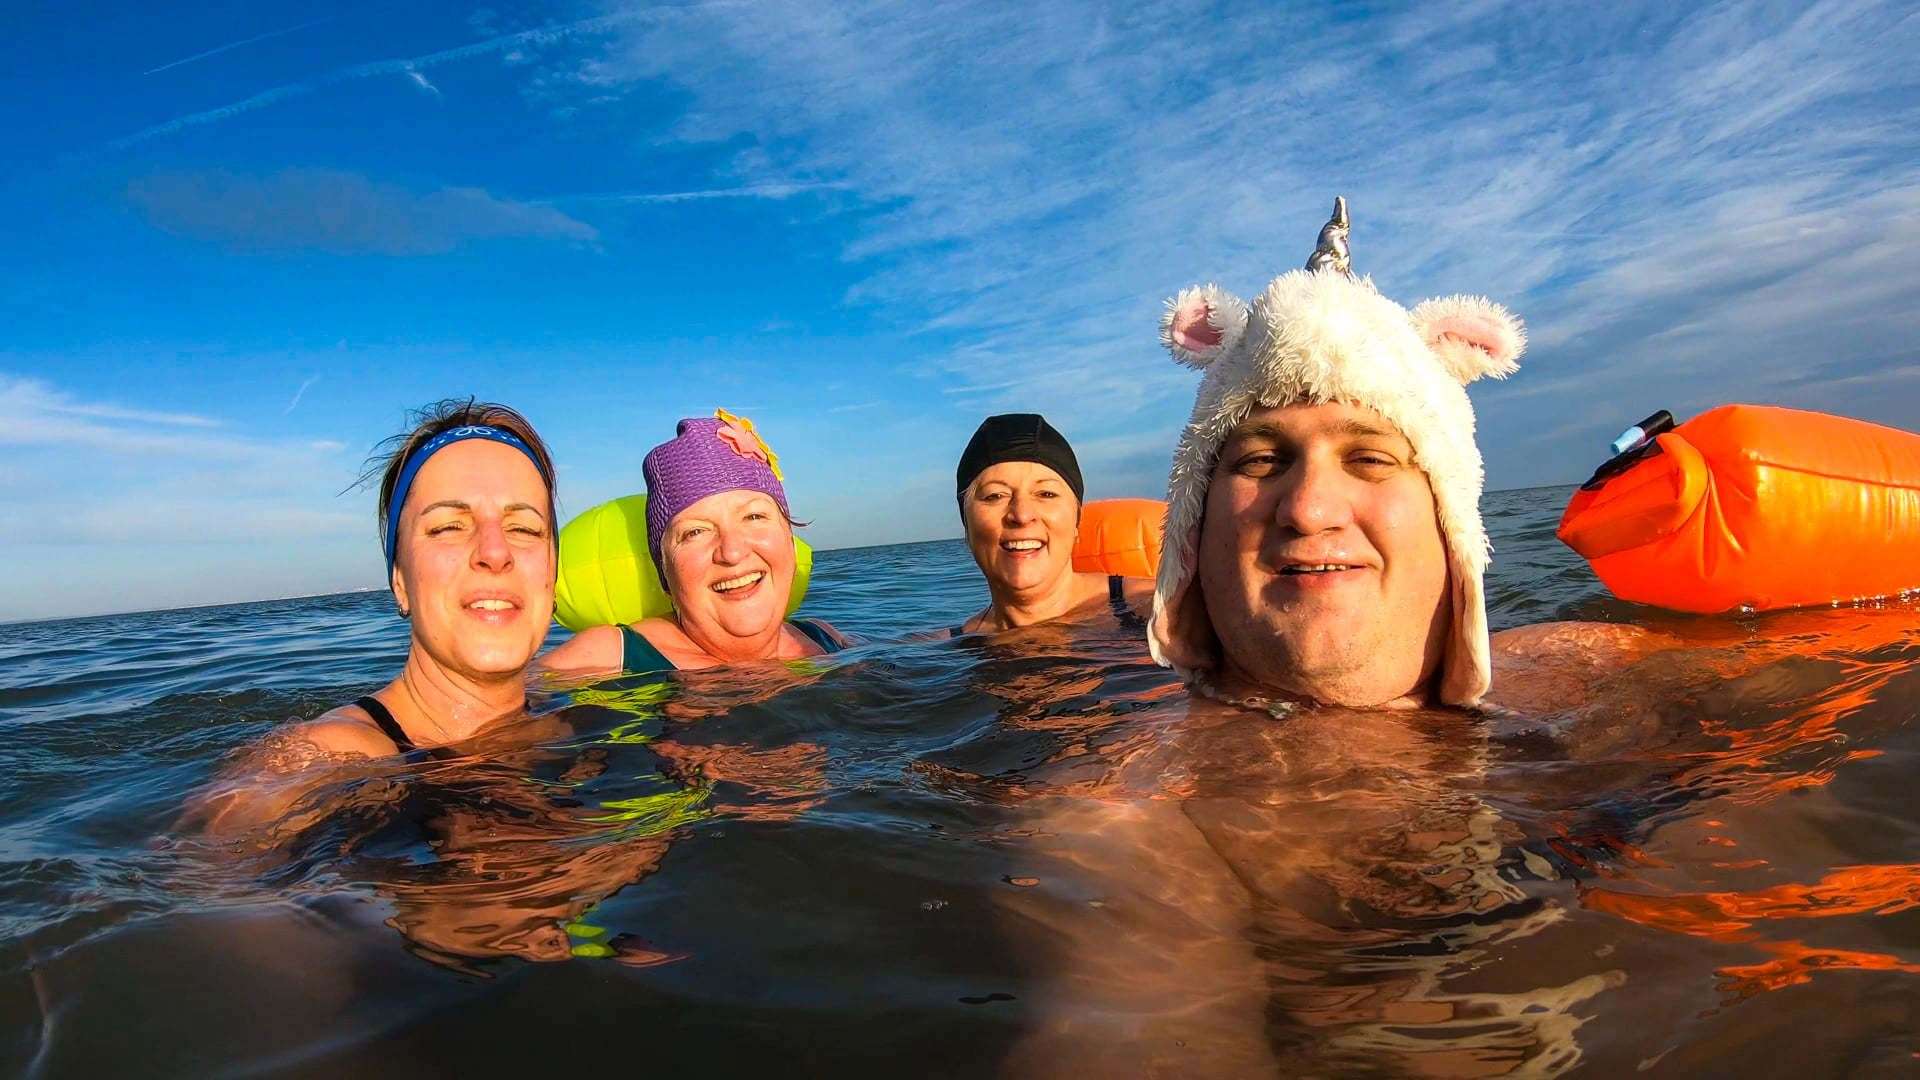 The Sheppey Bluetits 'wild' swimming club, with James Mead (right) made a splash on new year's day by taking the plunge in the sea at The Leas, Minster. Picture: James Mead